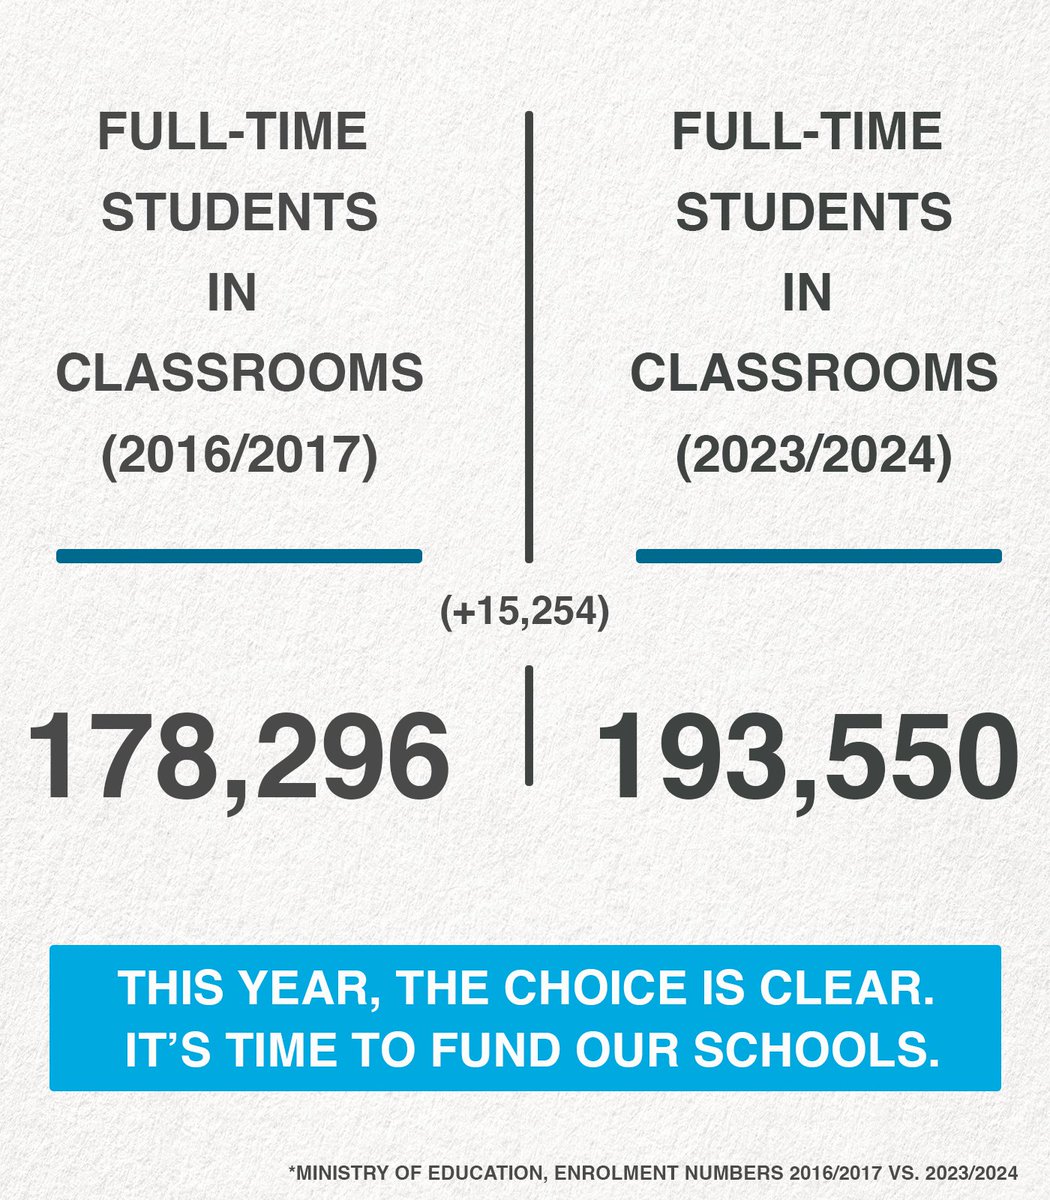 This is why teachers are out fighting for our students. Under the Sask. Party, since 2016, we've only added ONE full-time teacher for an additional 15,254 students. This year, the choice is clear. It's time for change. #skpoli #cdnpoli